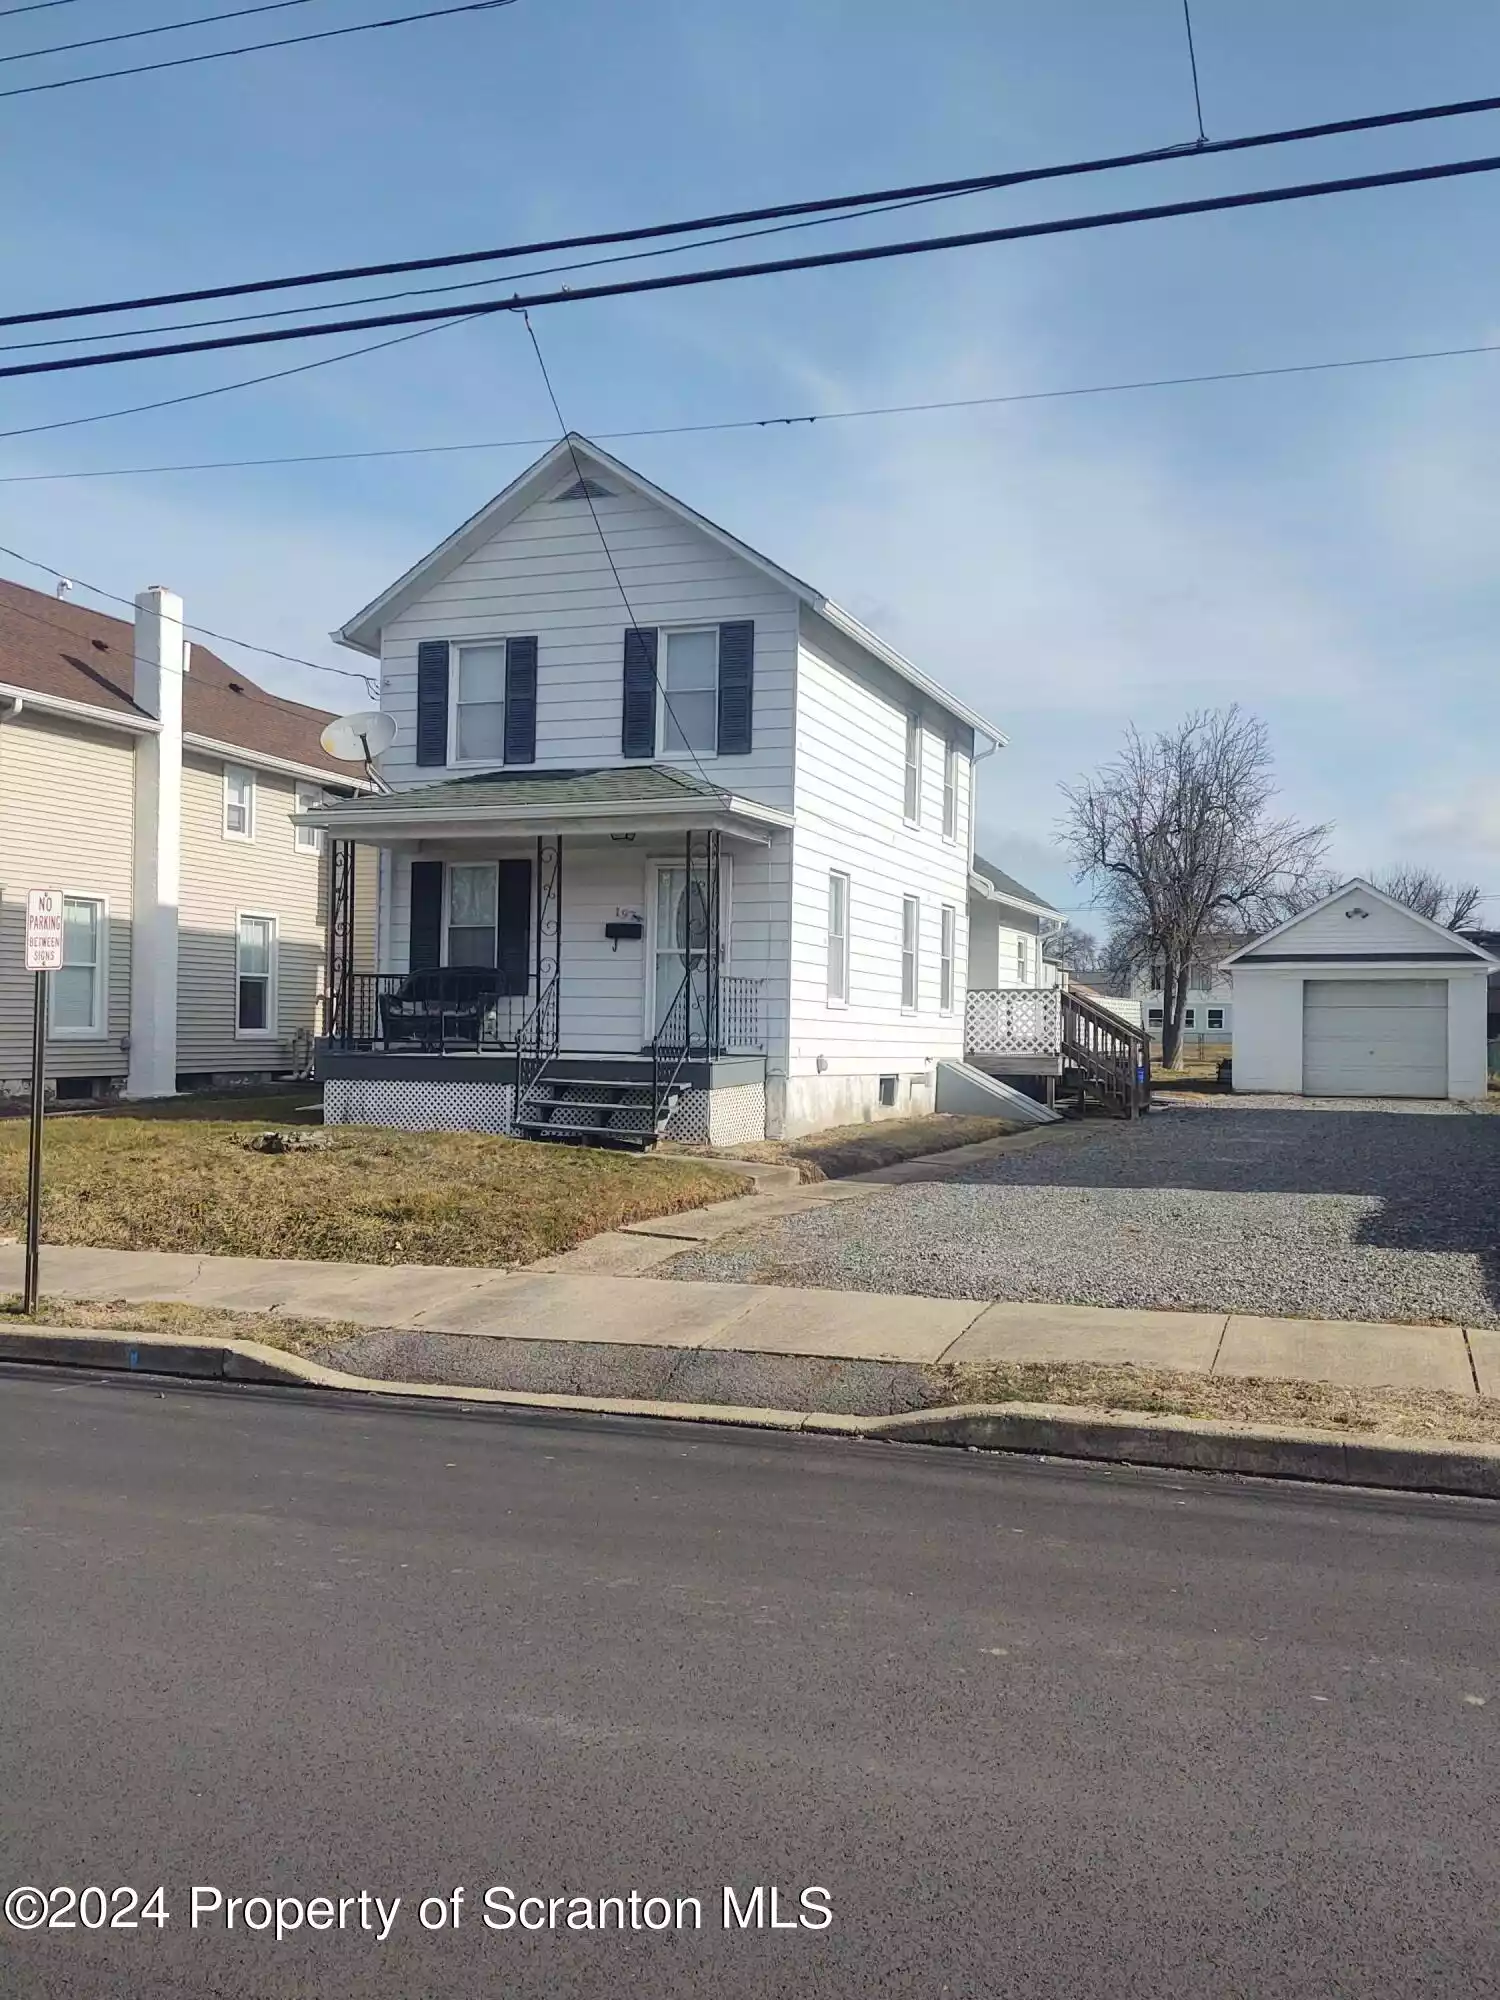 197 Hughes Street, Swoyersville, Pennsylvania 18704, 5 Rooms Rooms,1 BathroomBathrooms,Residential,For Sale,Hughes,GSBSC1270